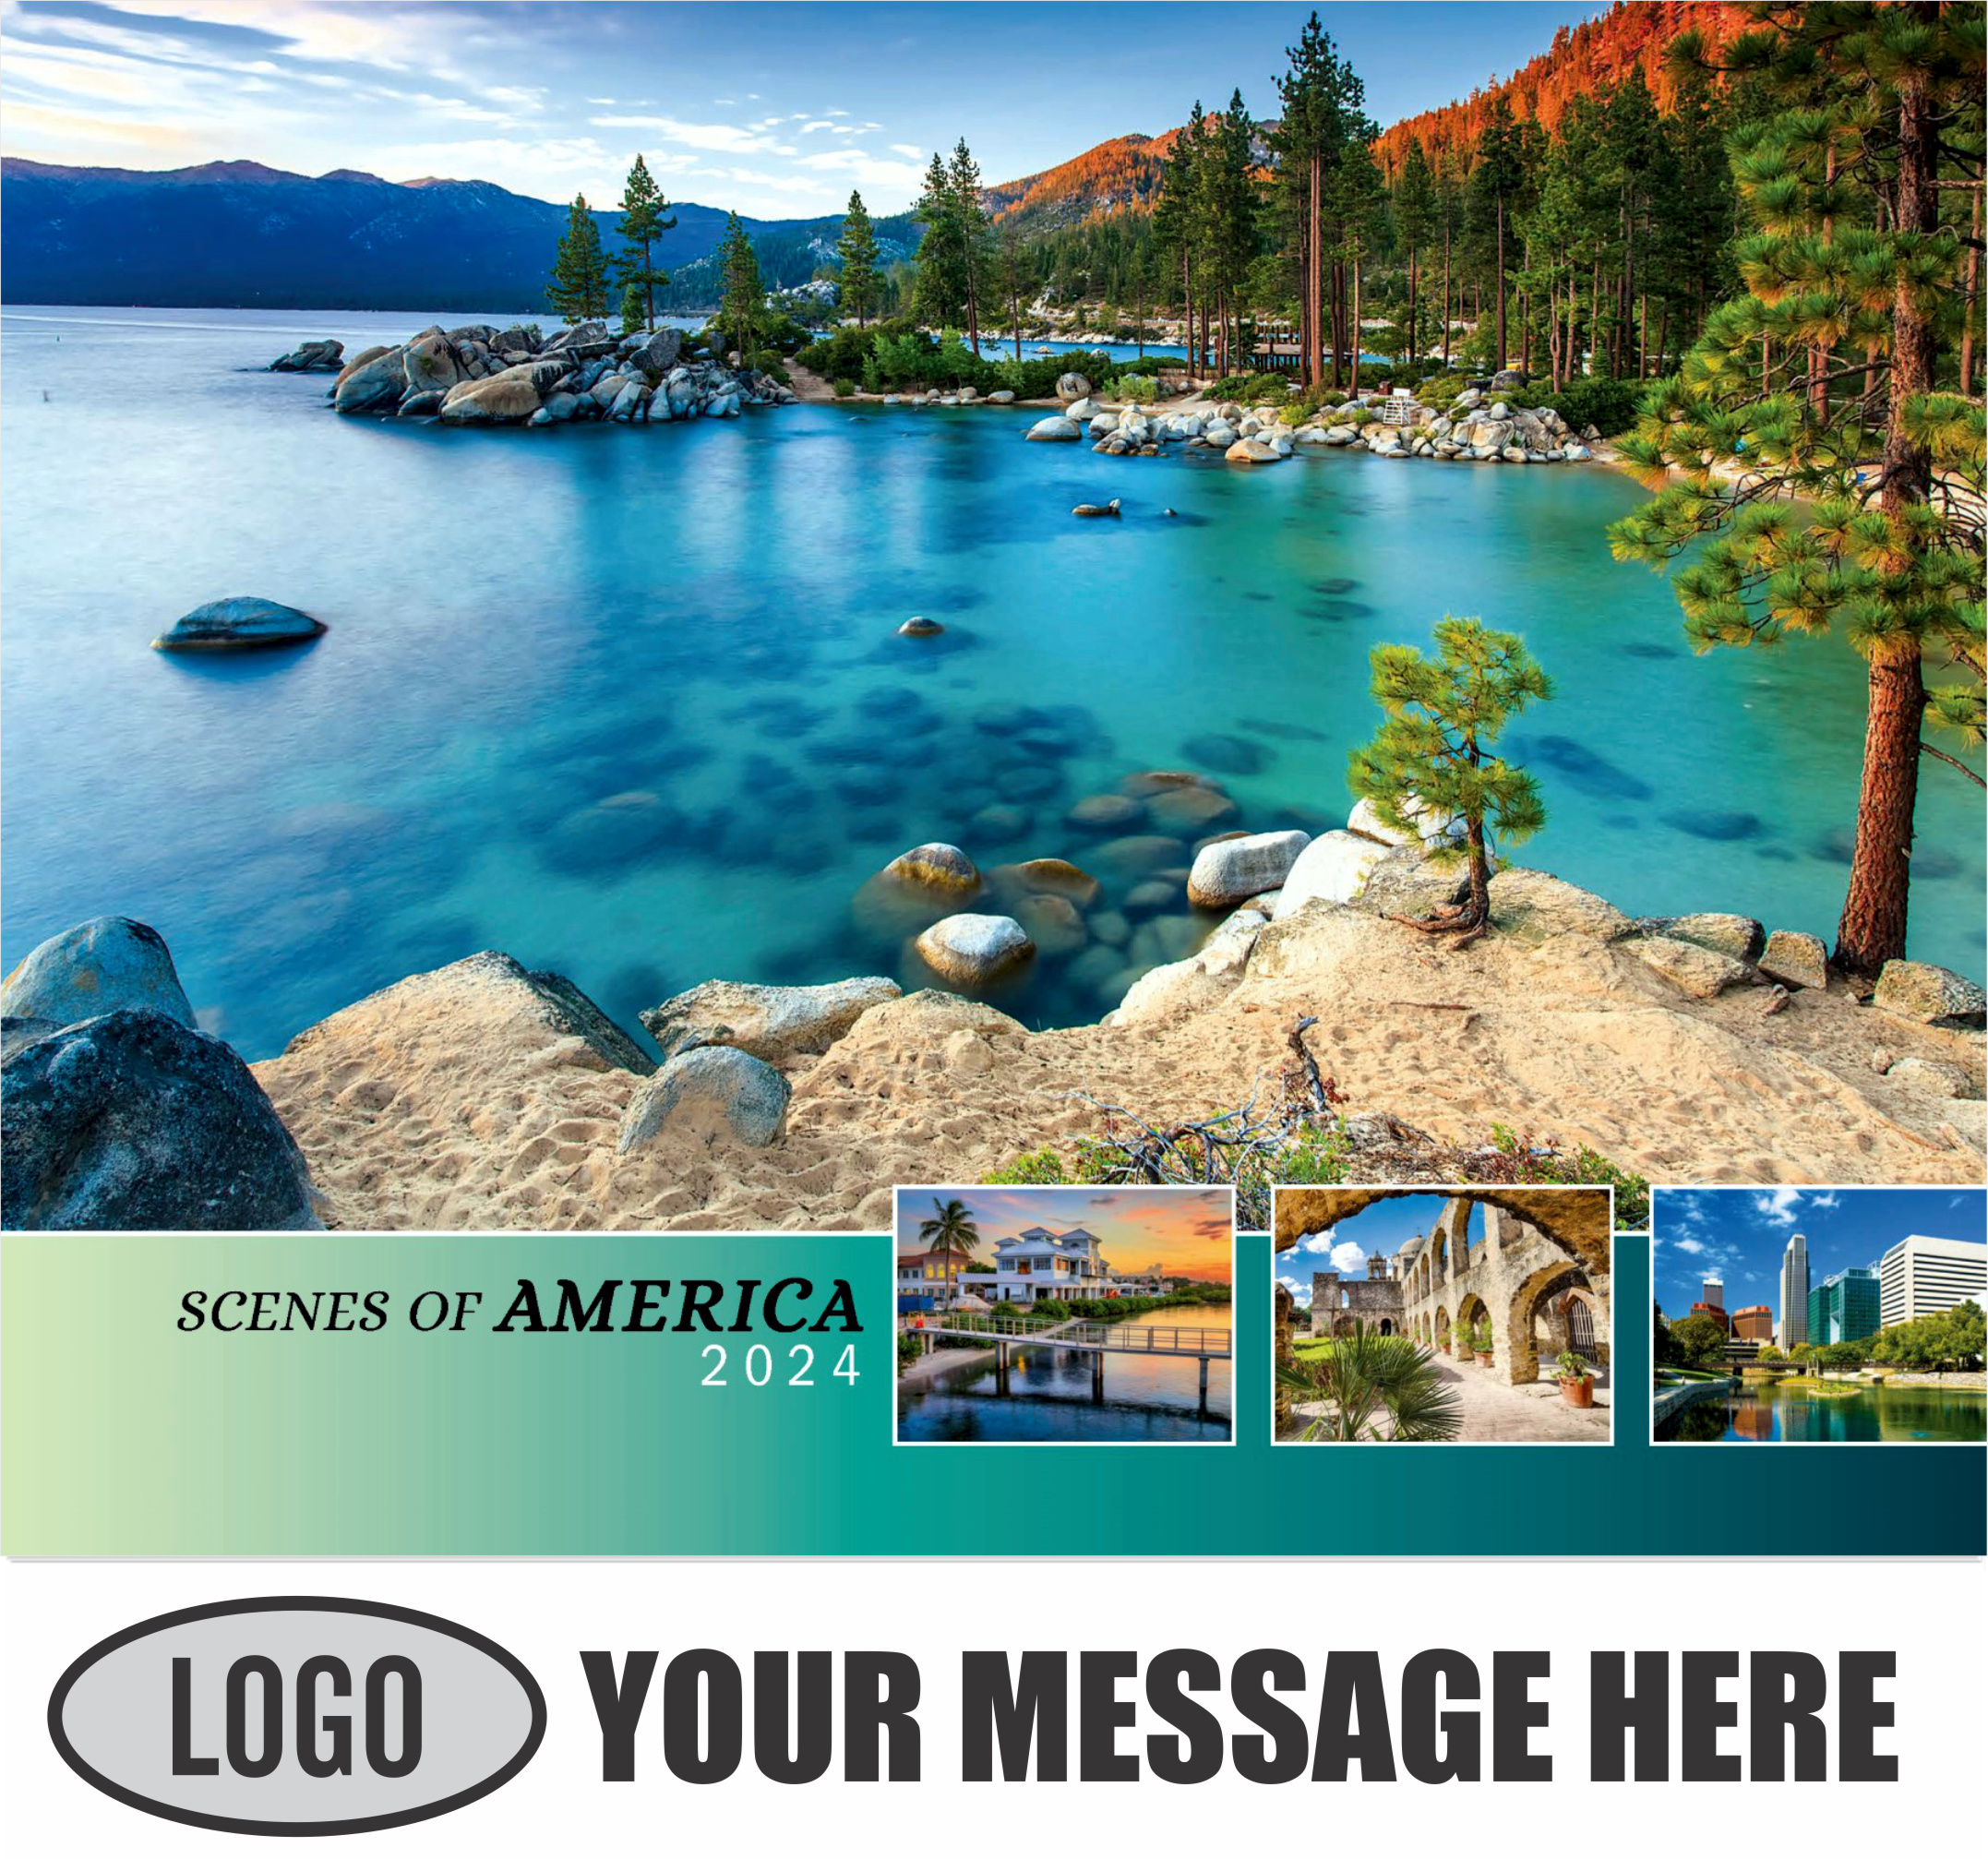 Scenes of America 2024 Business Advertising Wall Calendar - cover